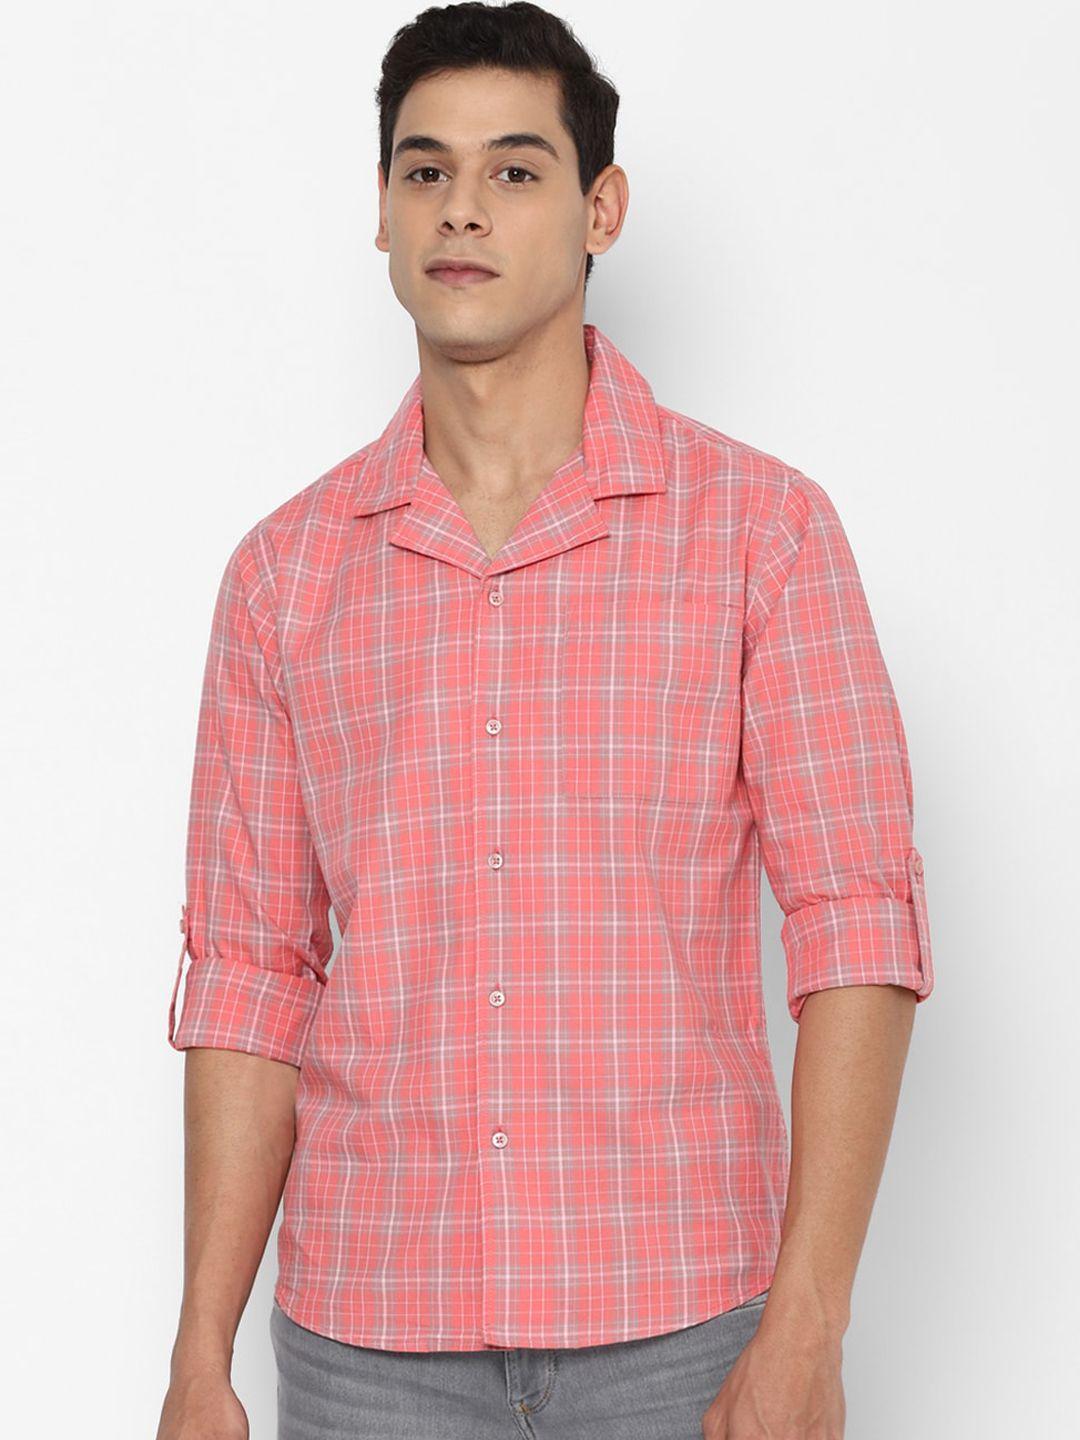 forever 21 men grey & pink classic fit opaque checked cotton casual shirt